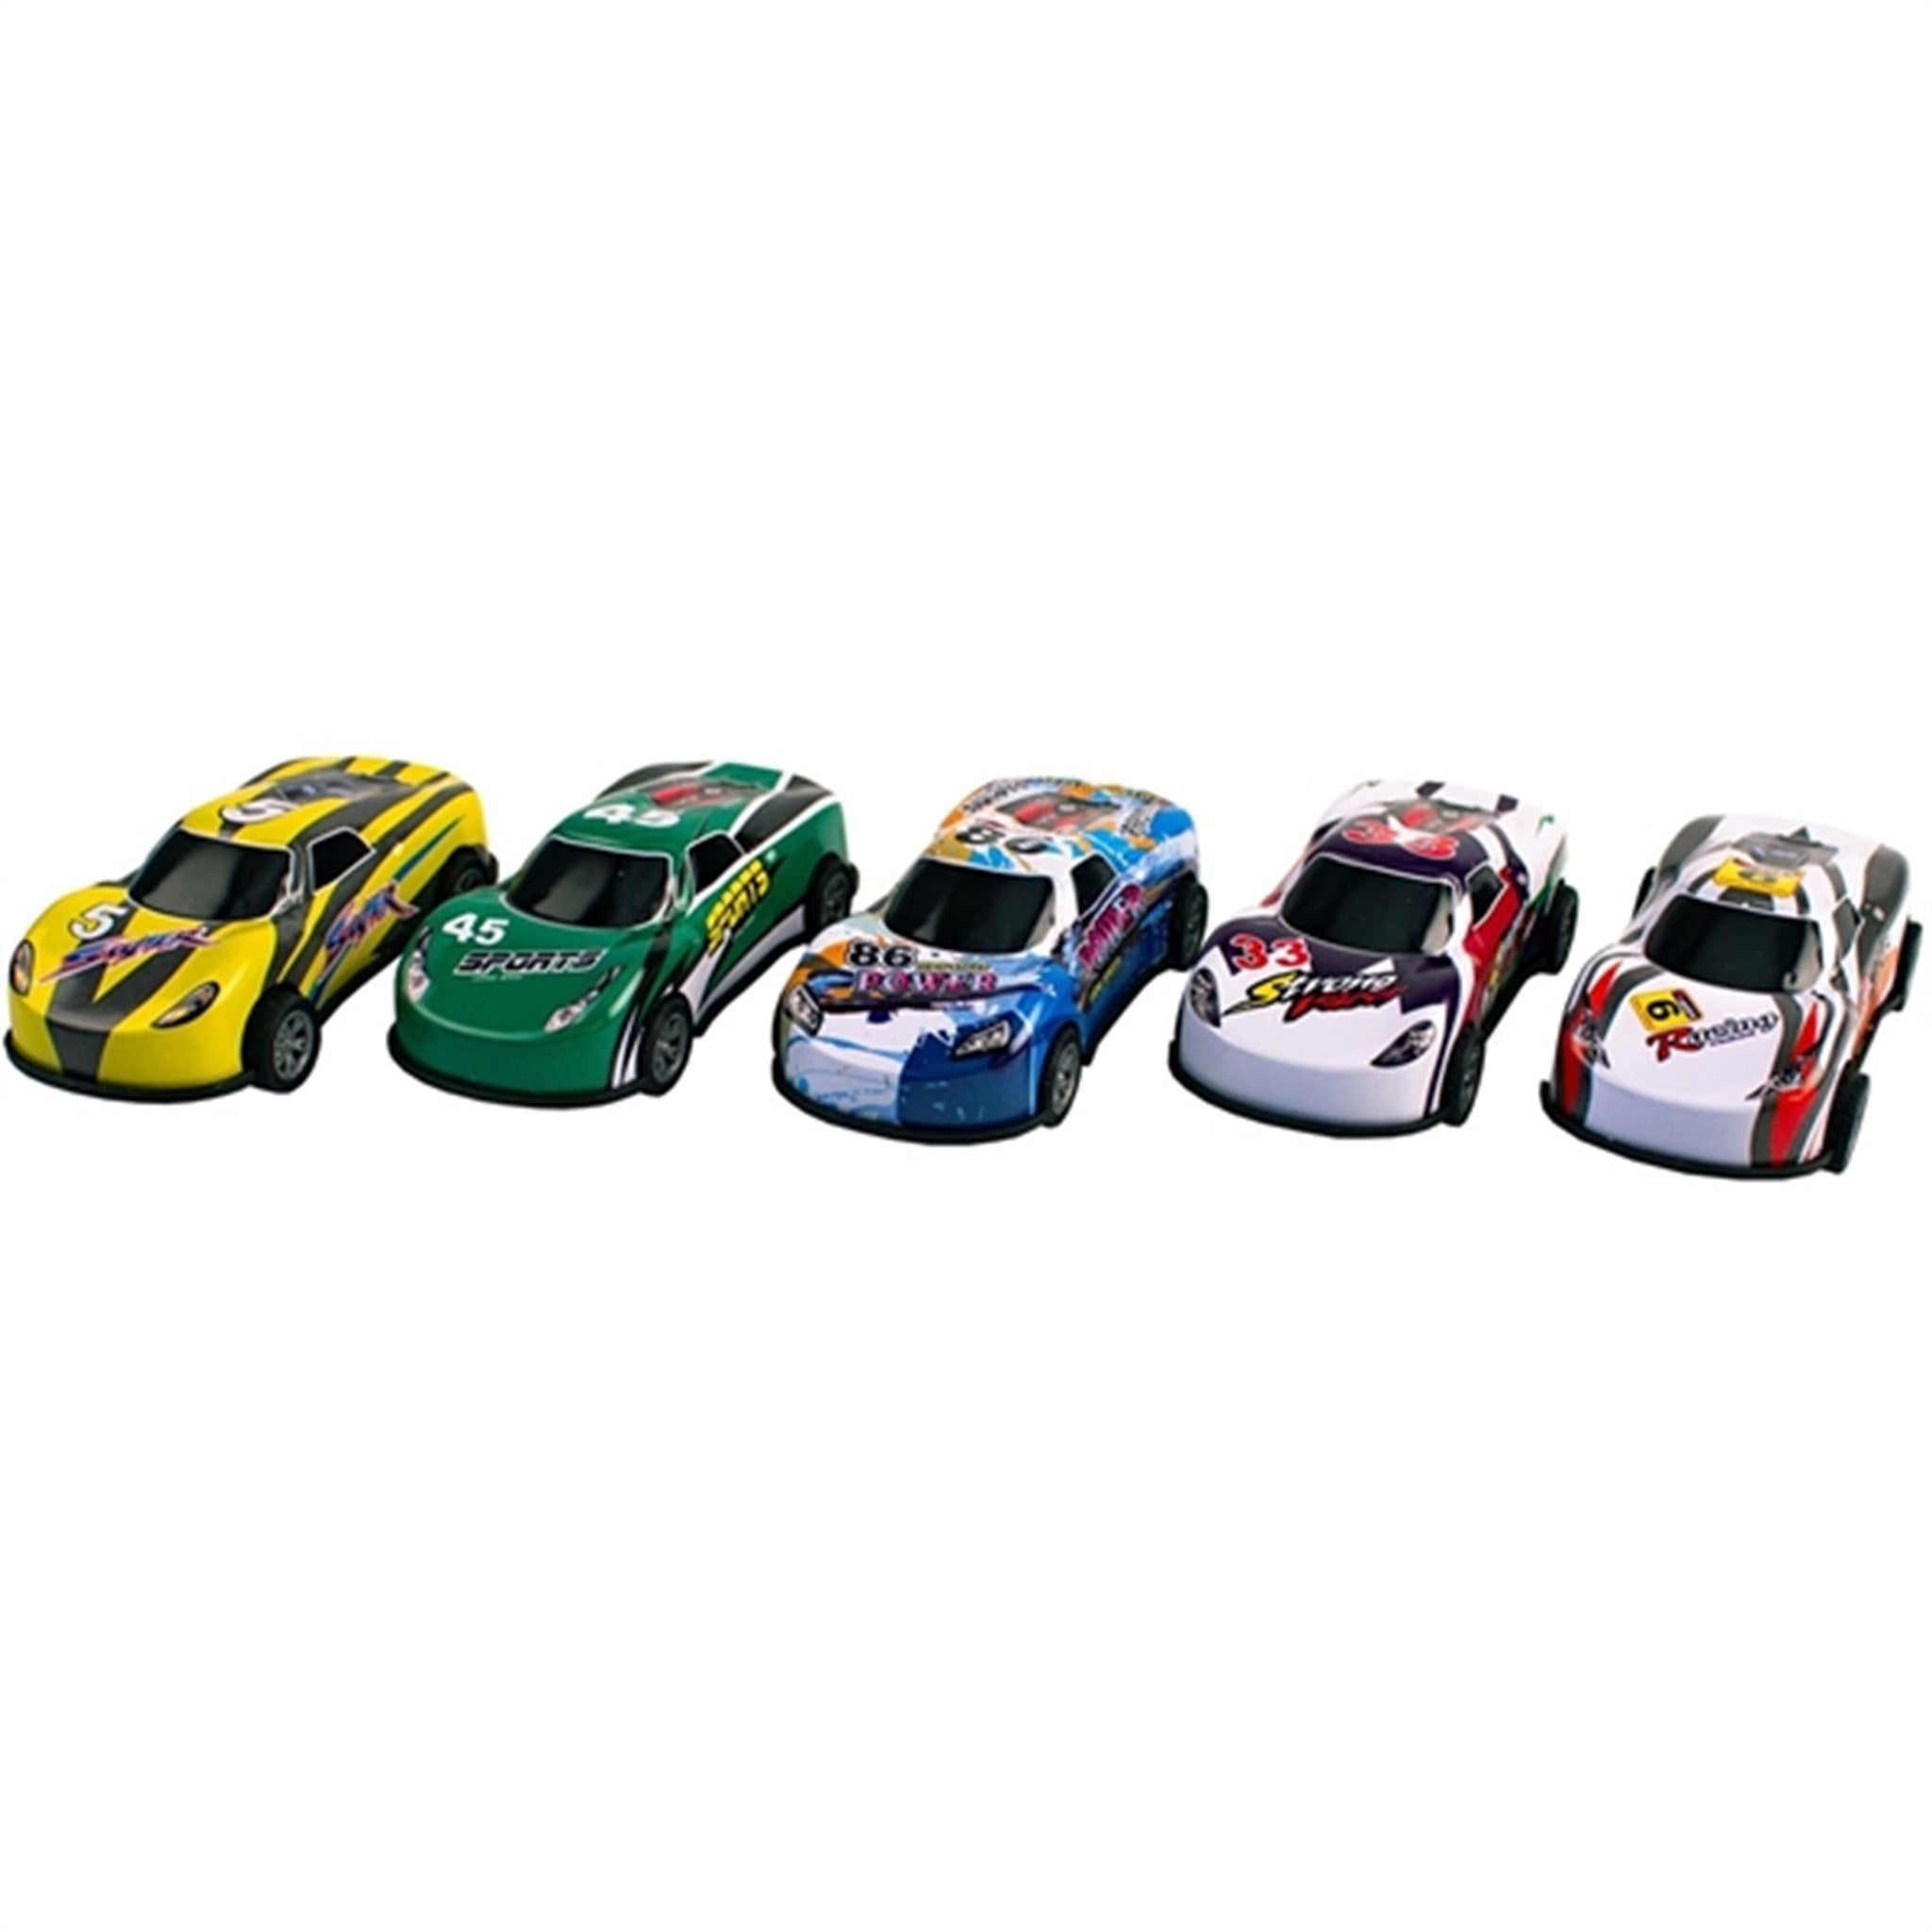 Magni Race Cars With Pull Back 5 Pieces Multi